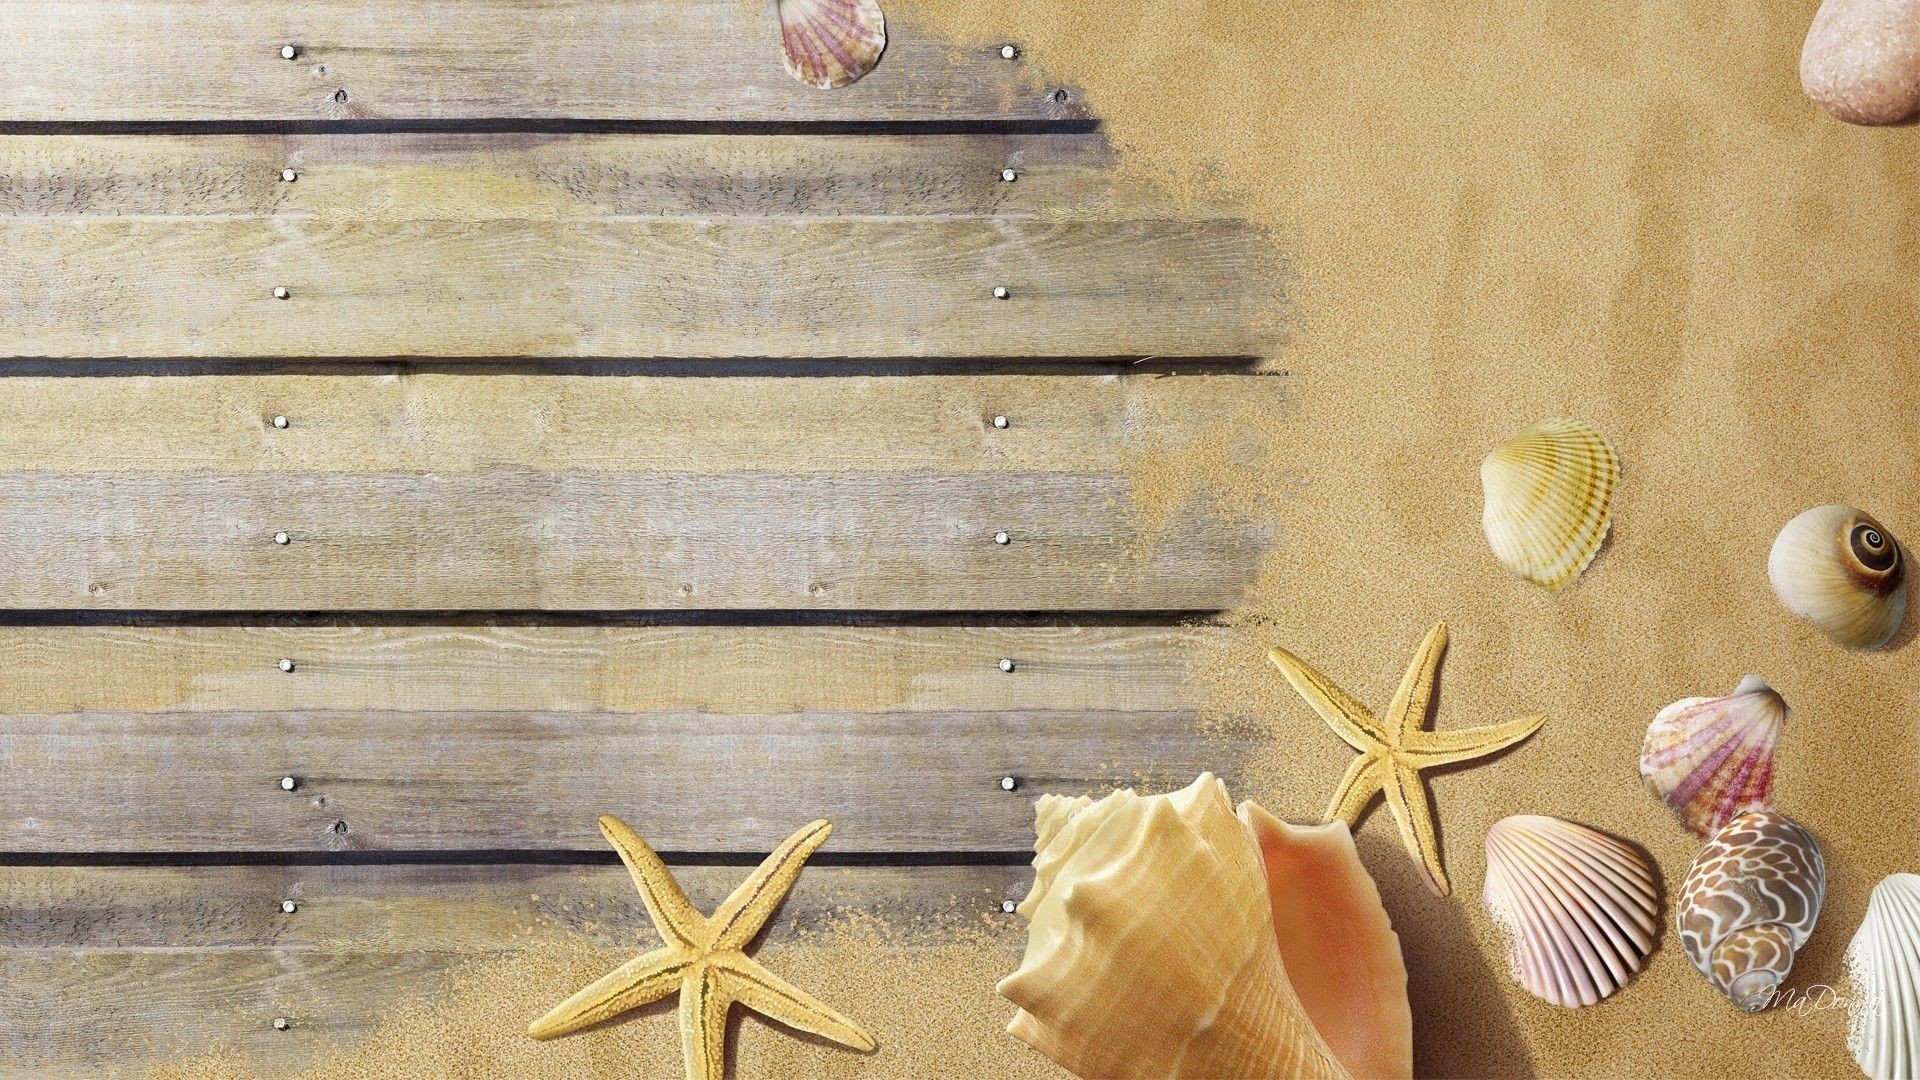 Seashells On Boards wallpaper for computer